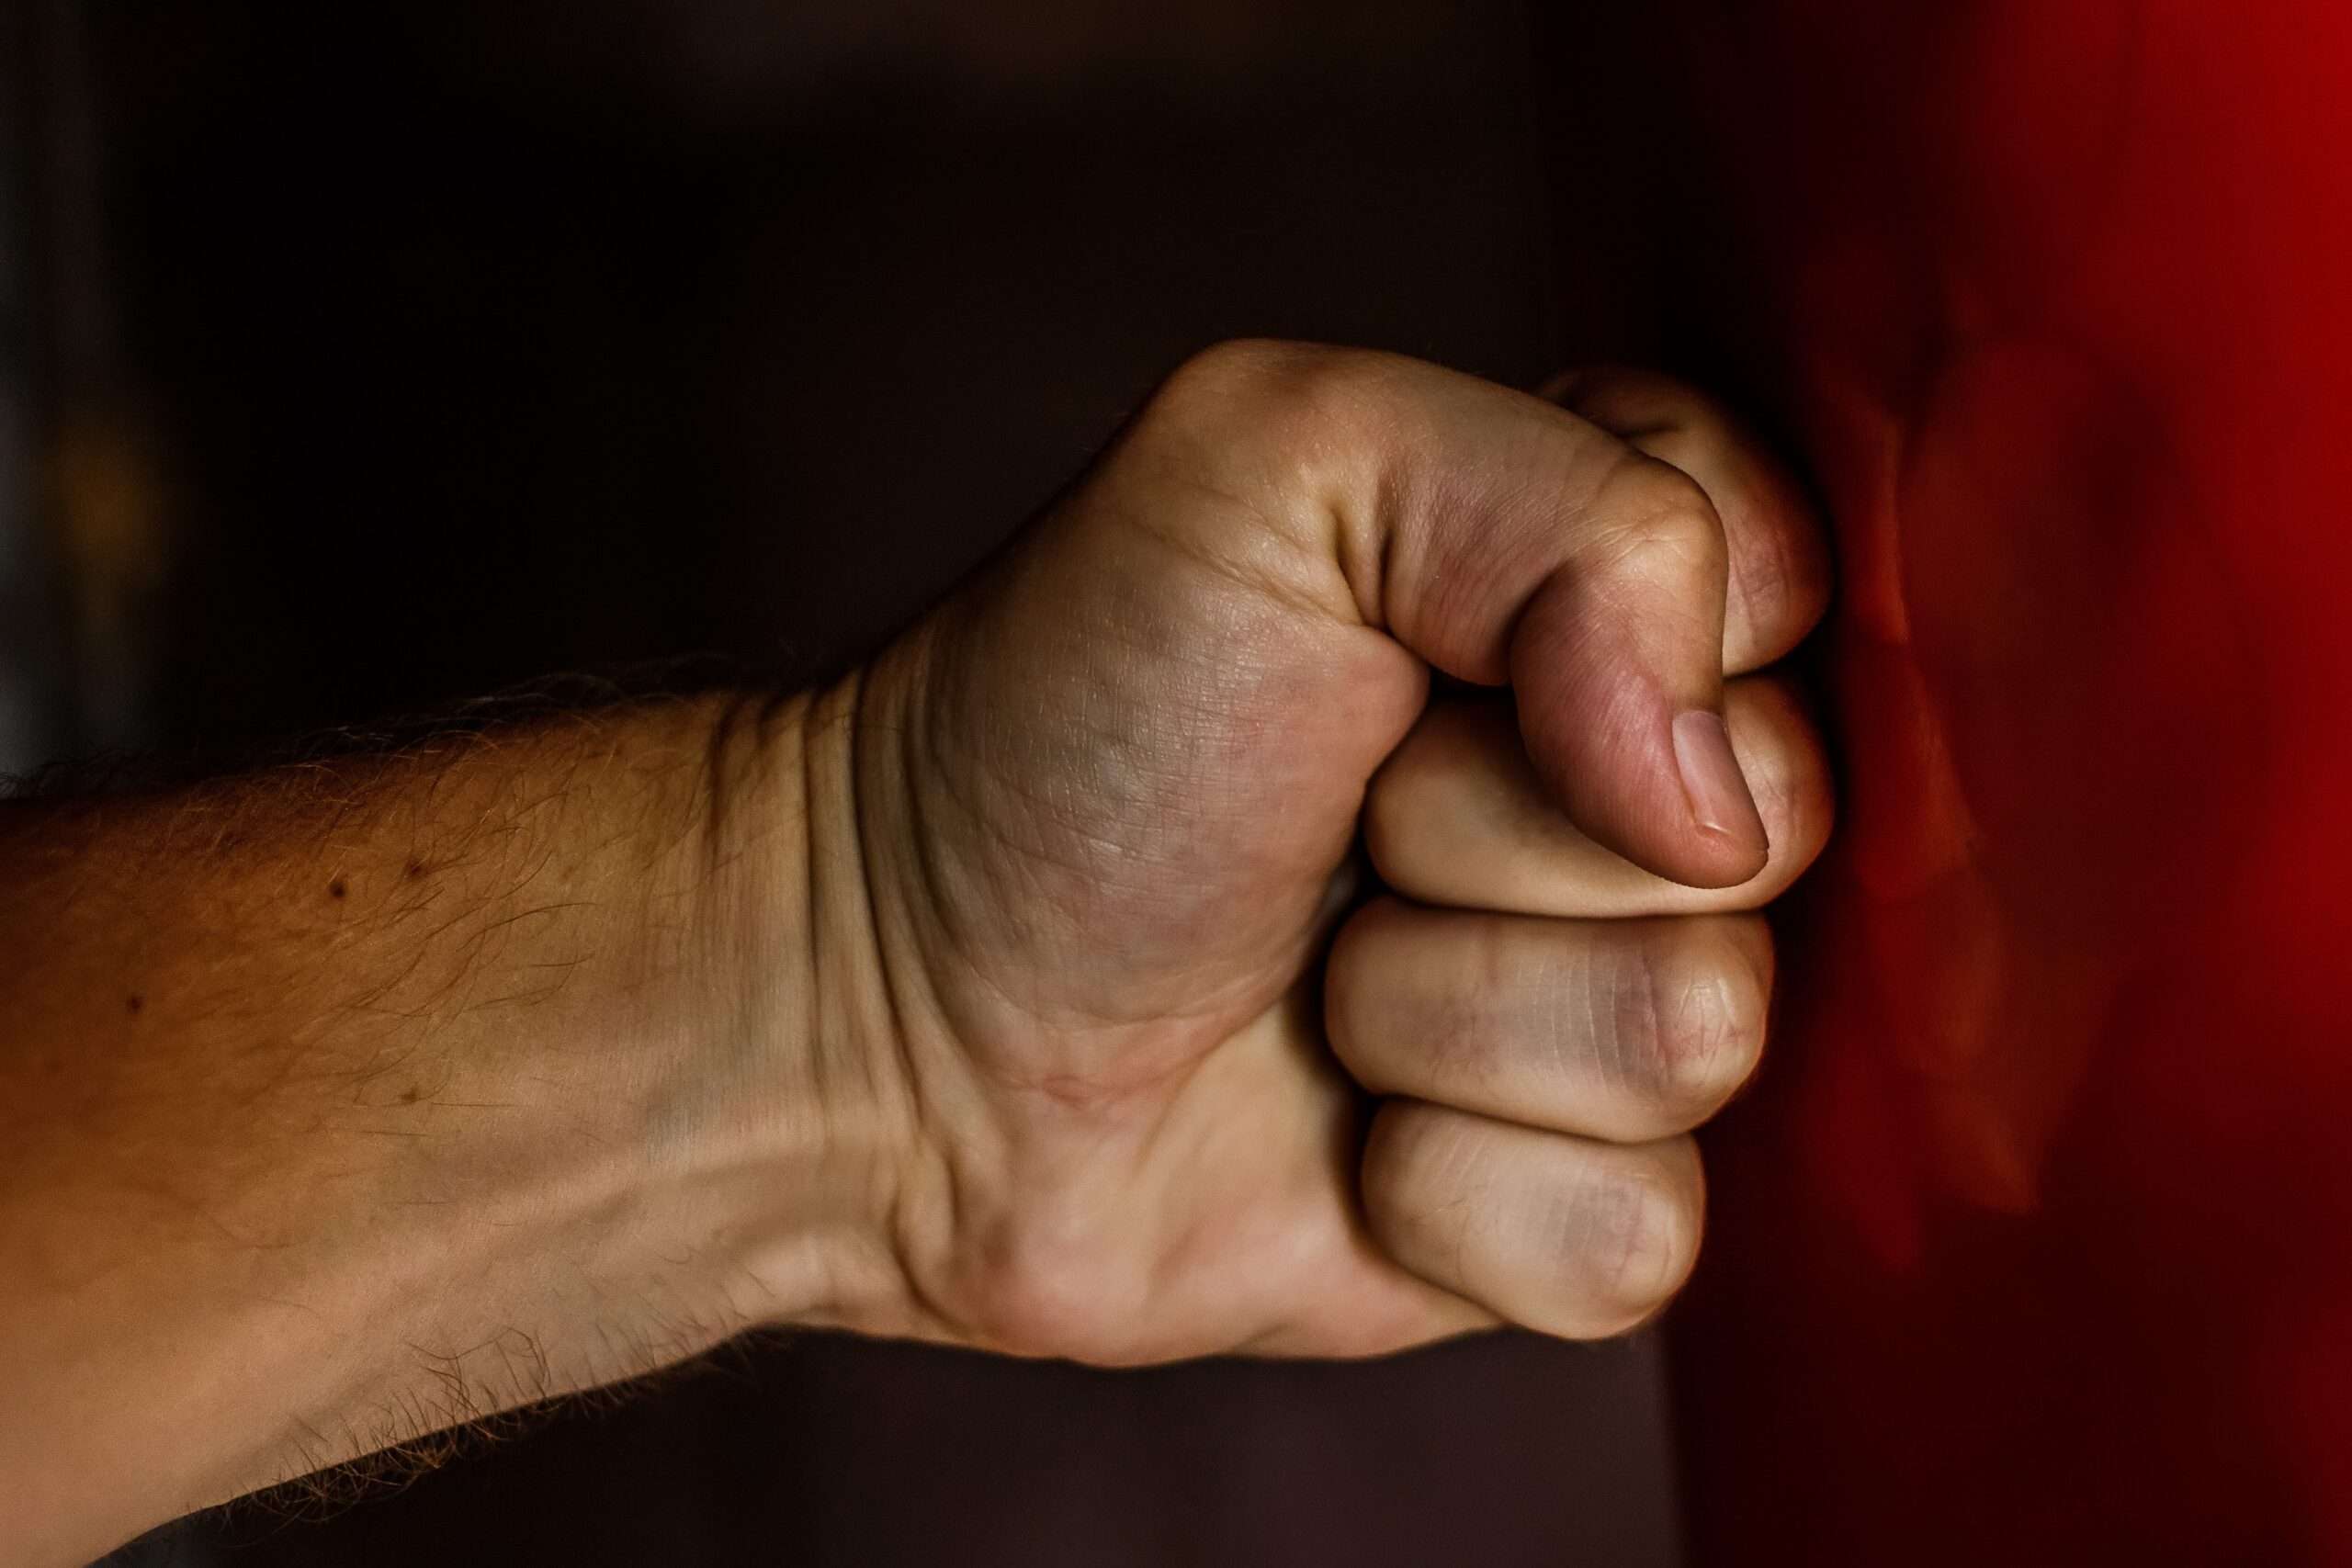 anger management coaching strategies picture of a clenched fist